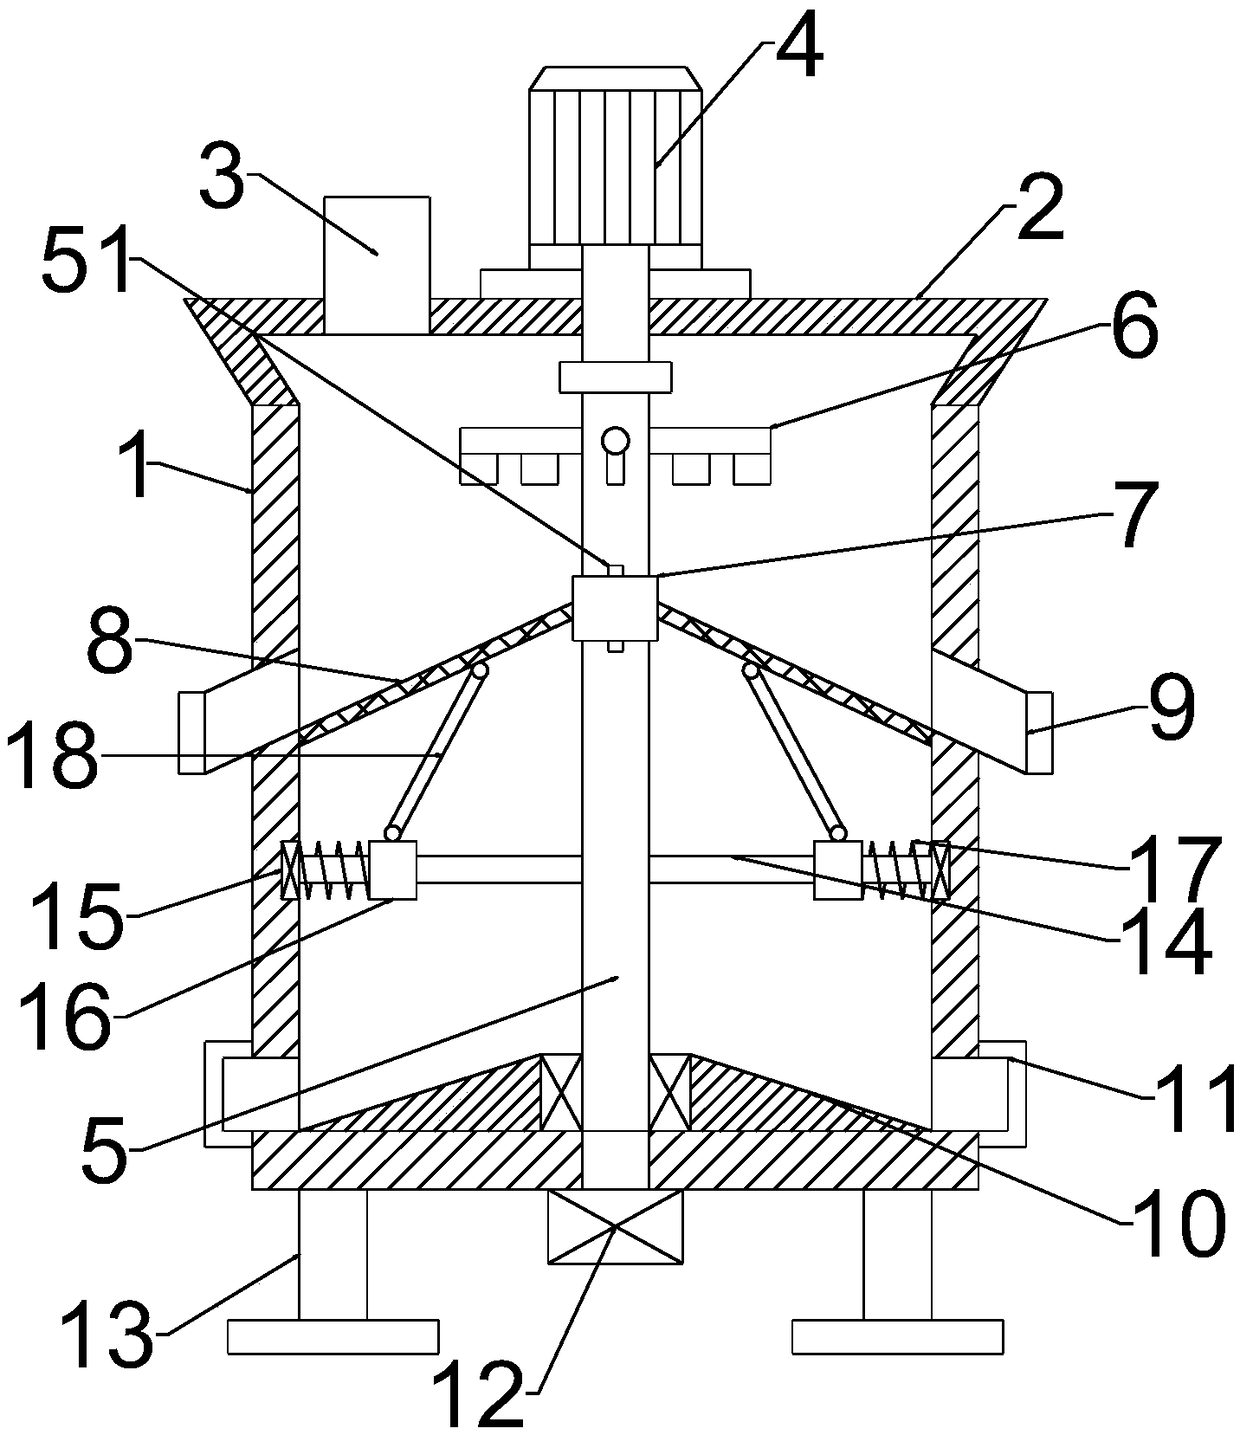 Centrifugal vibration impurity-filtering device for cereals